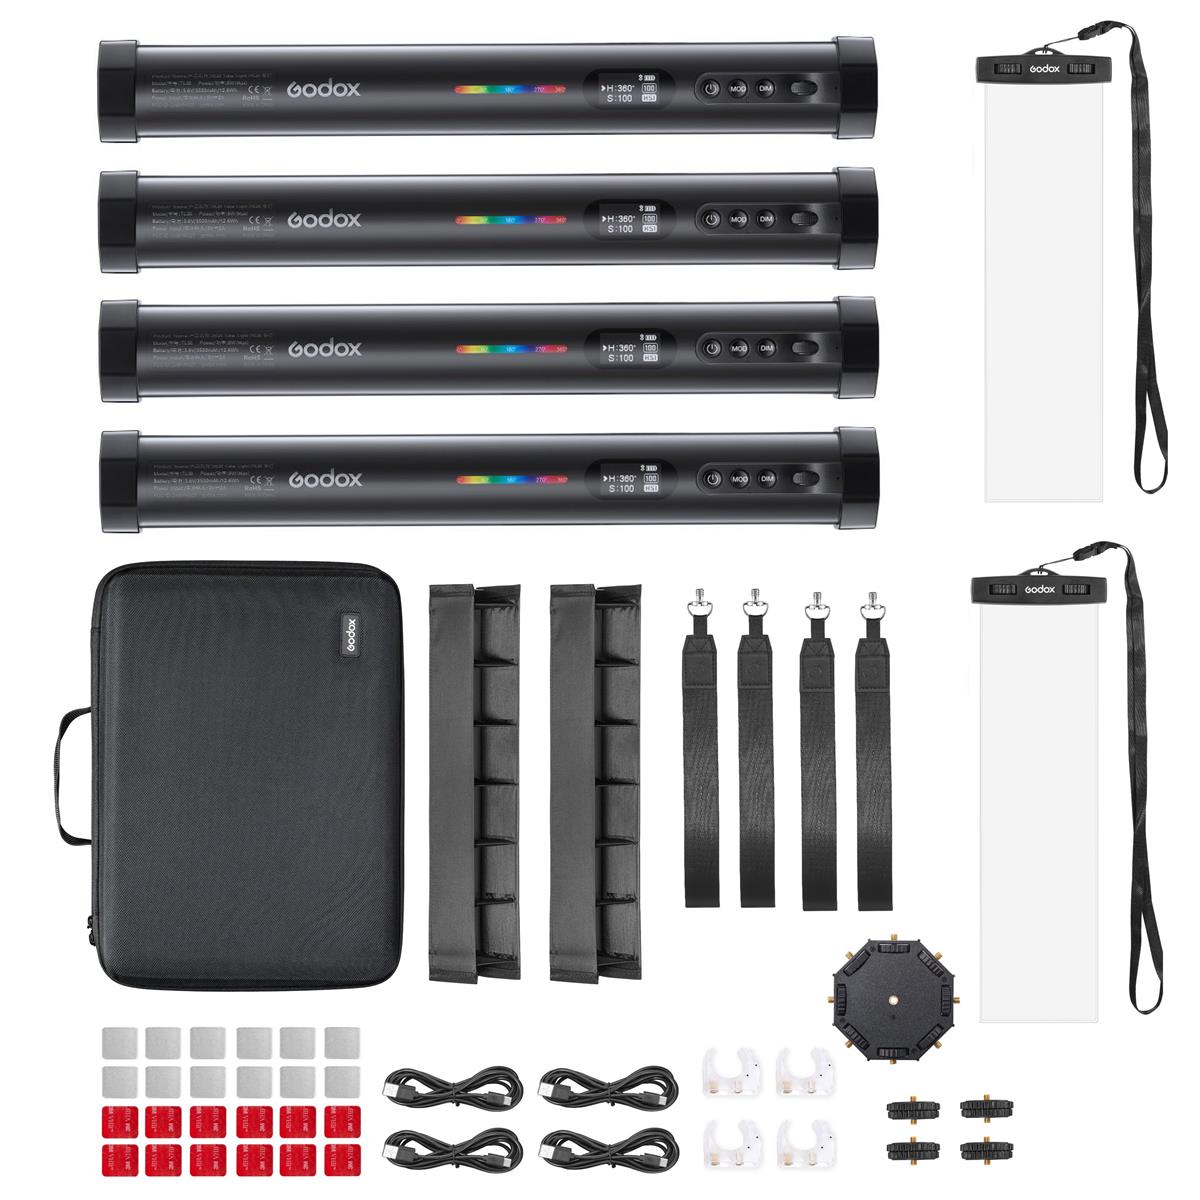 GODOX TL30-K4 2700k-6300k RGB LED Tube Light Kit with 36000 Multi Color Function and 13 Tunable Effect modes with Wireless Bluetooth Control via Godox App Support